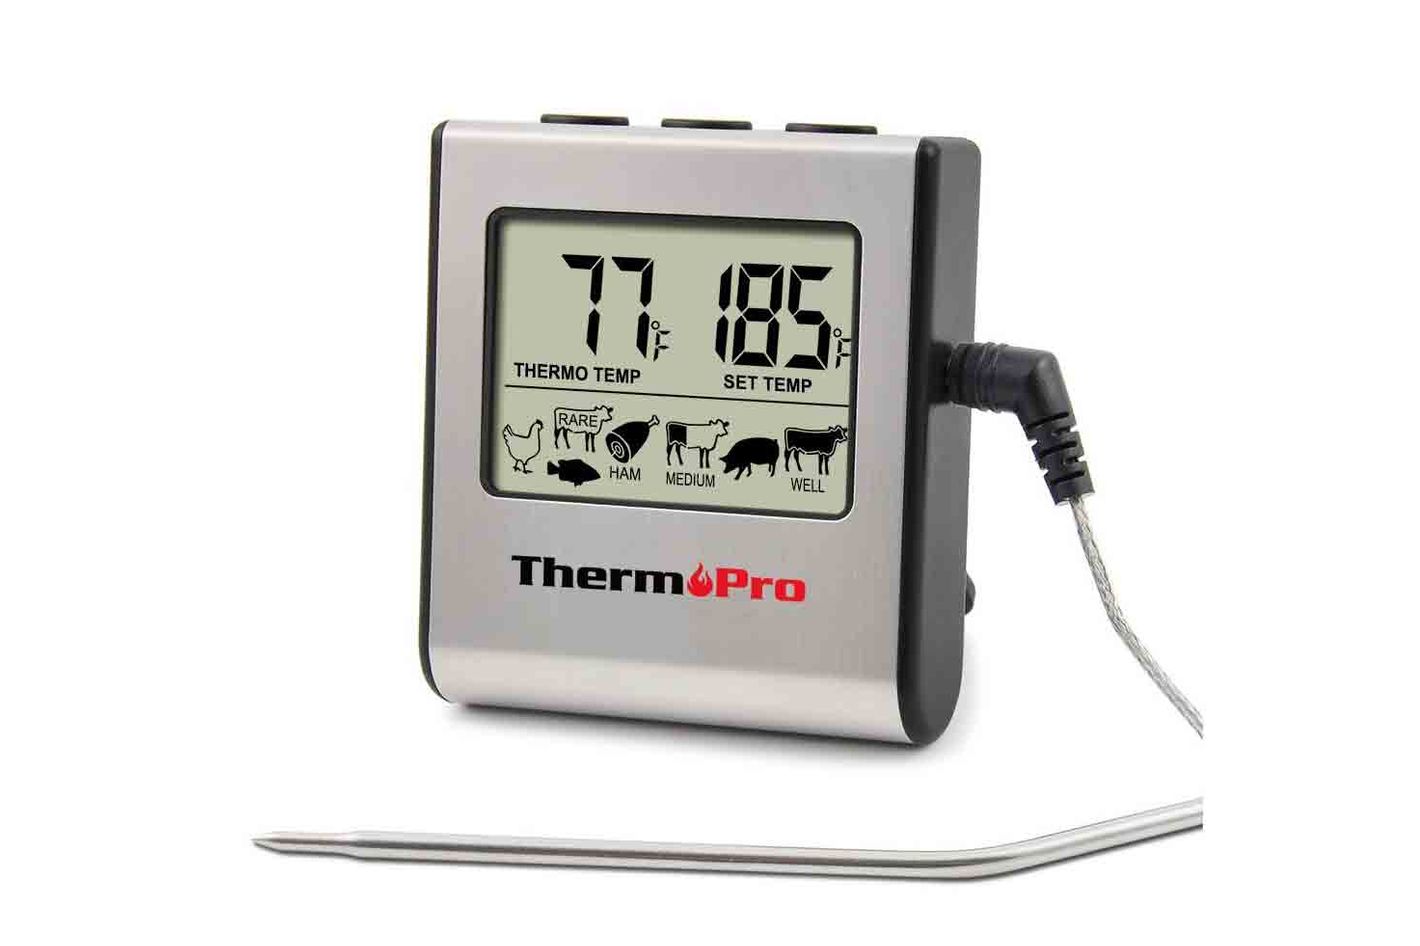 https://pyxis.nymag.com/v1/imgs/d91/542/a2ae21ac842400847da1822e86f396db31-Digital-Meat-Thermometer.2x.h473.w710.jpg